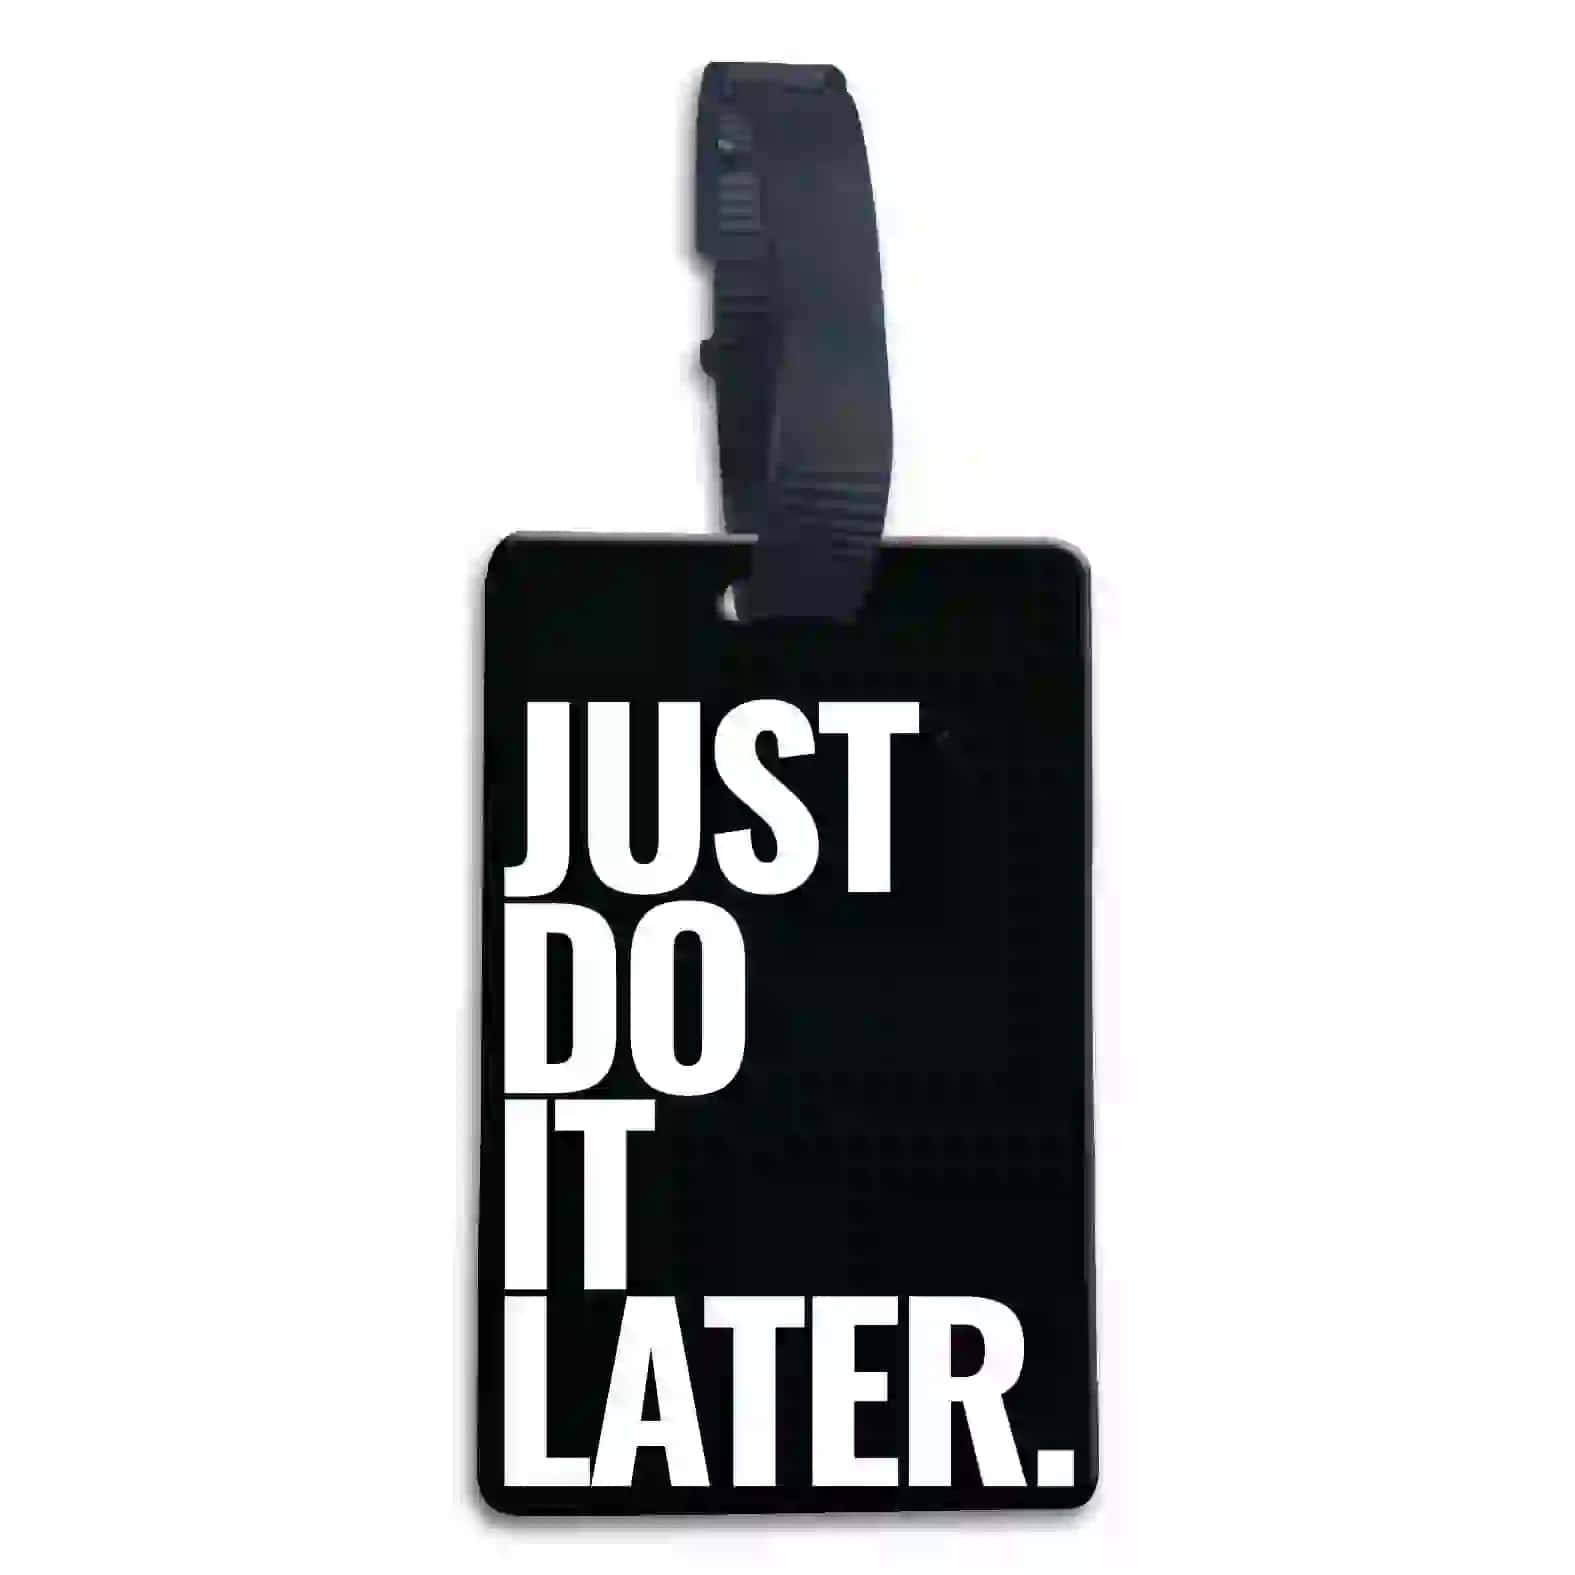 A serene, leisurely reminder: "Just Do It Later" Wallpaper